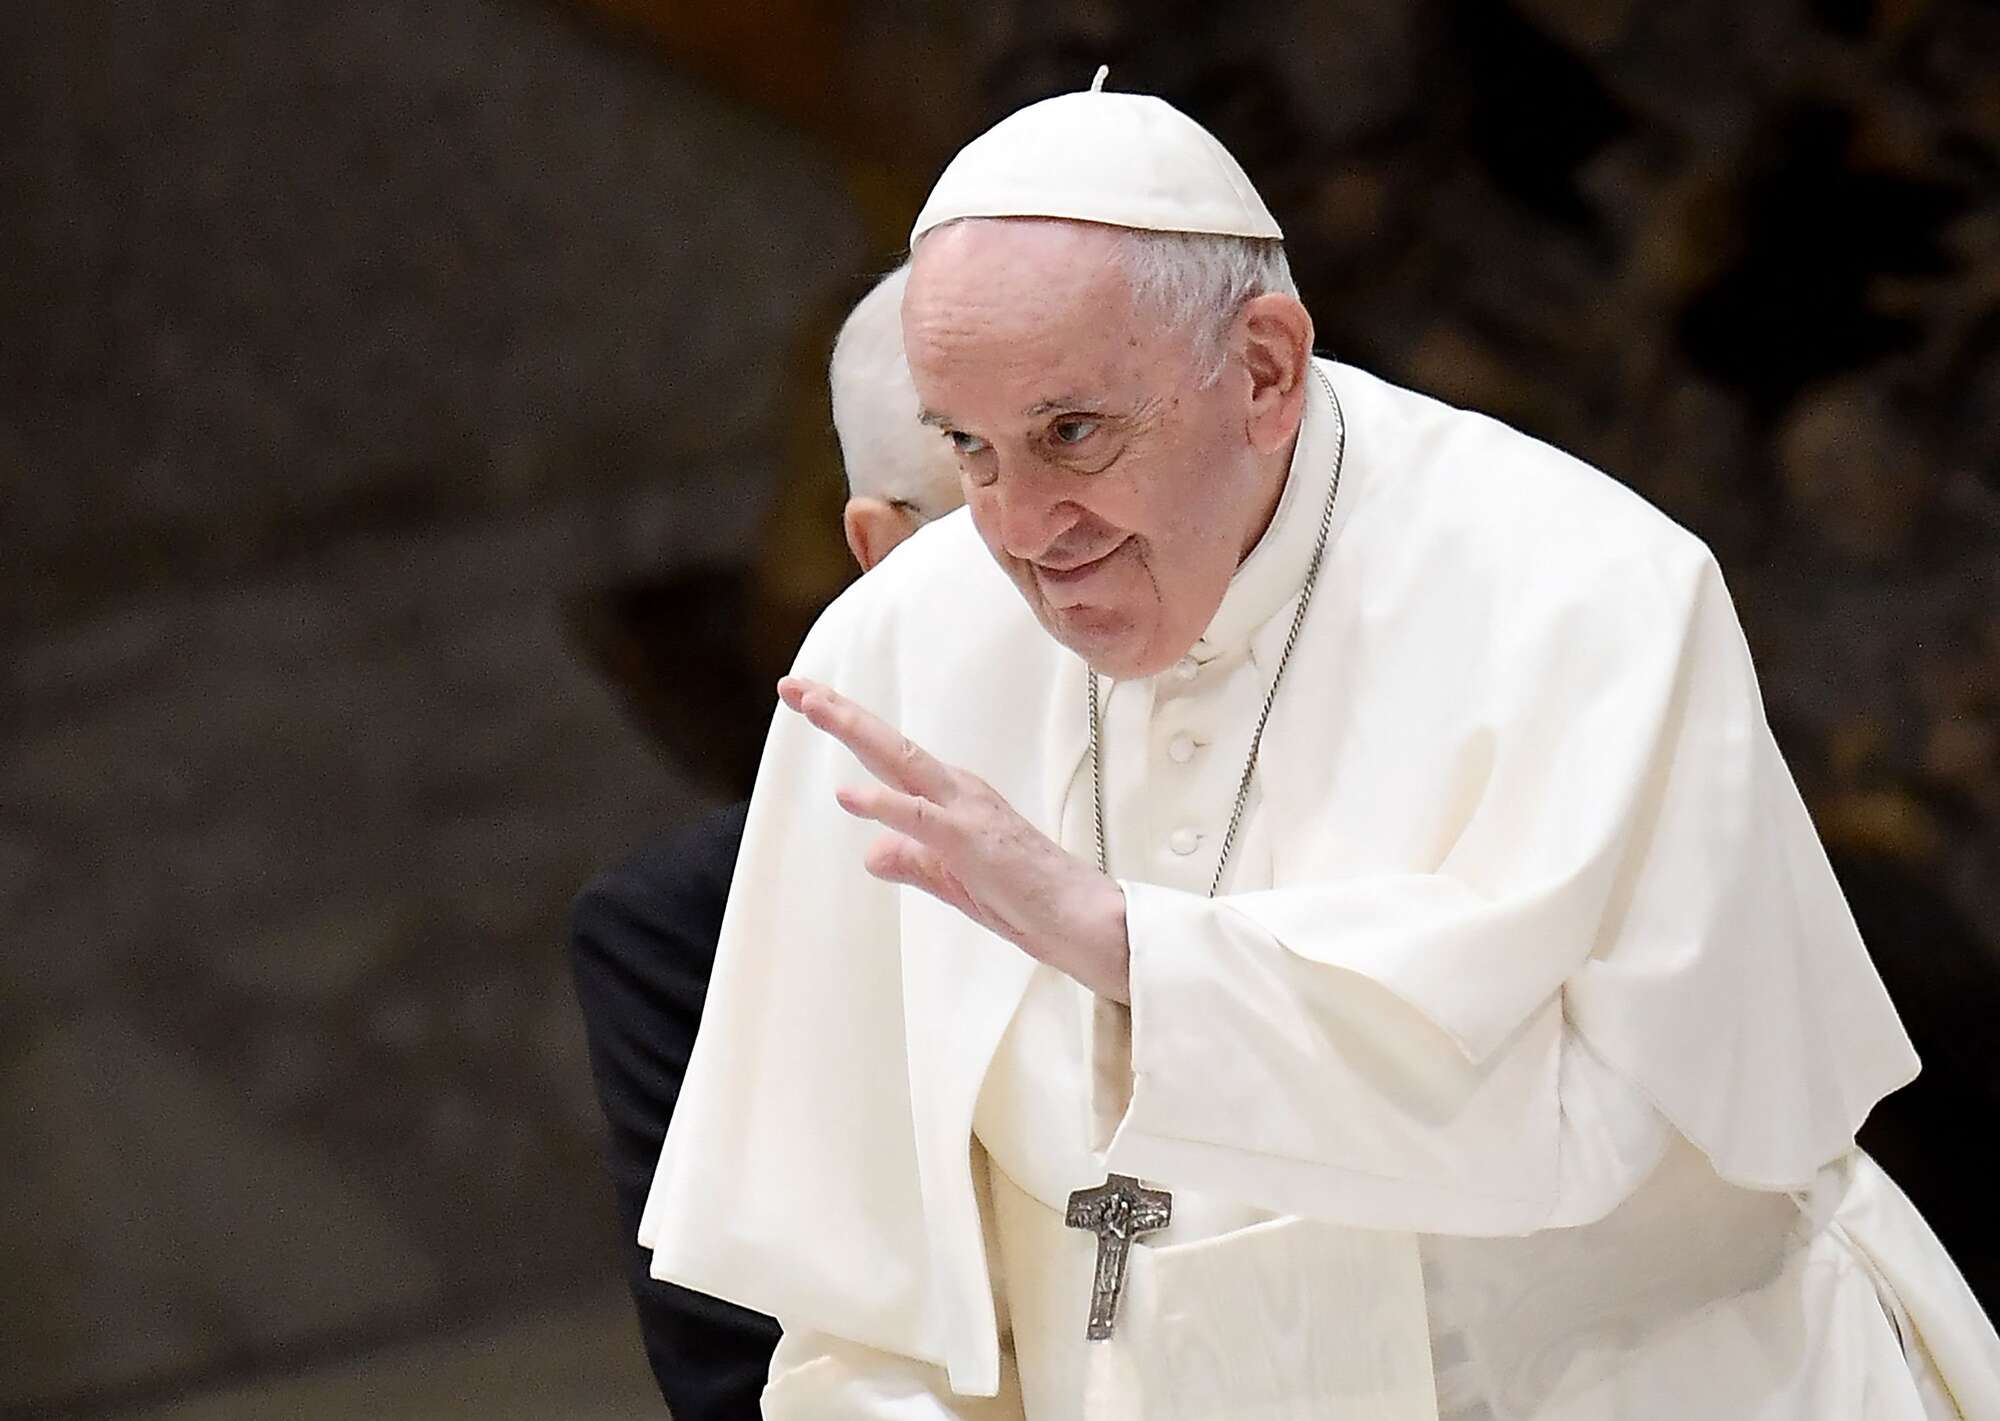 Pope Francis condemns ‘brutal atrocities’, ‘poison of greed’ fueling conflict in DRC